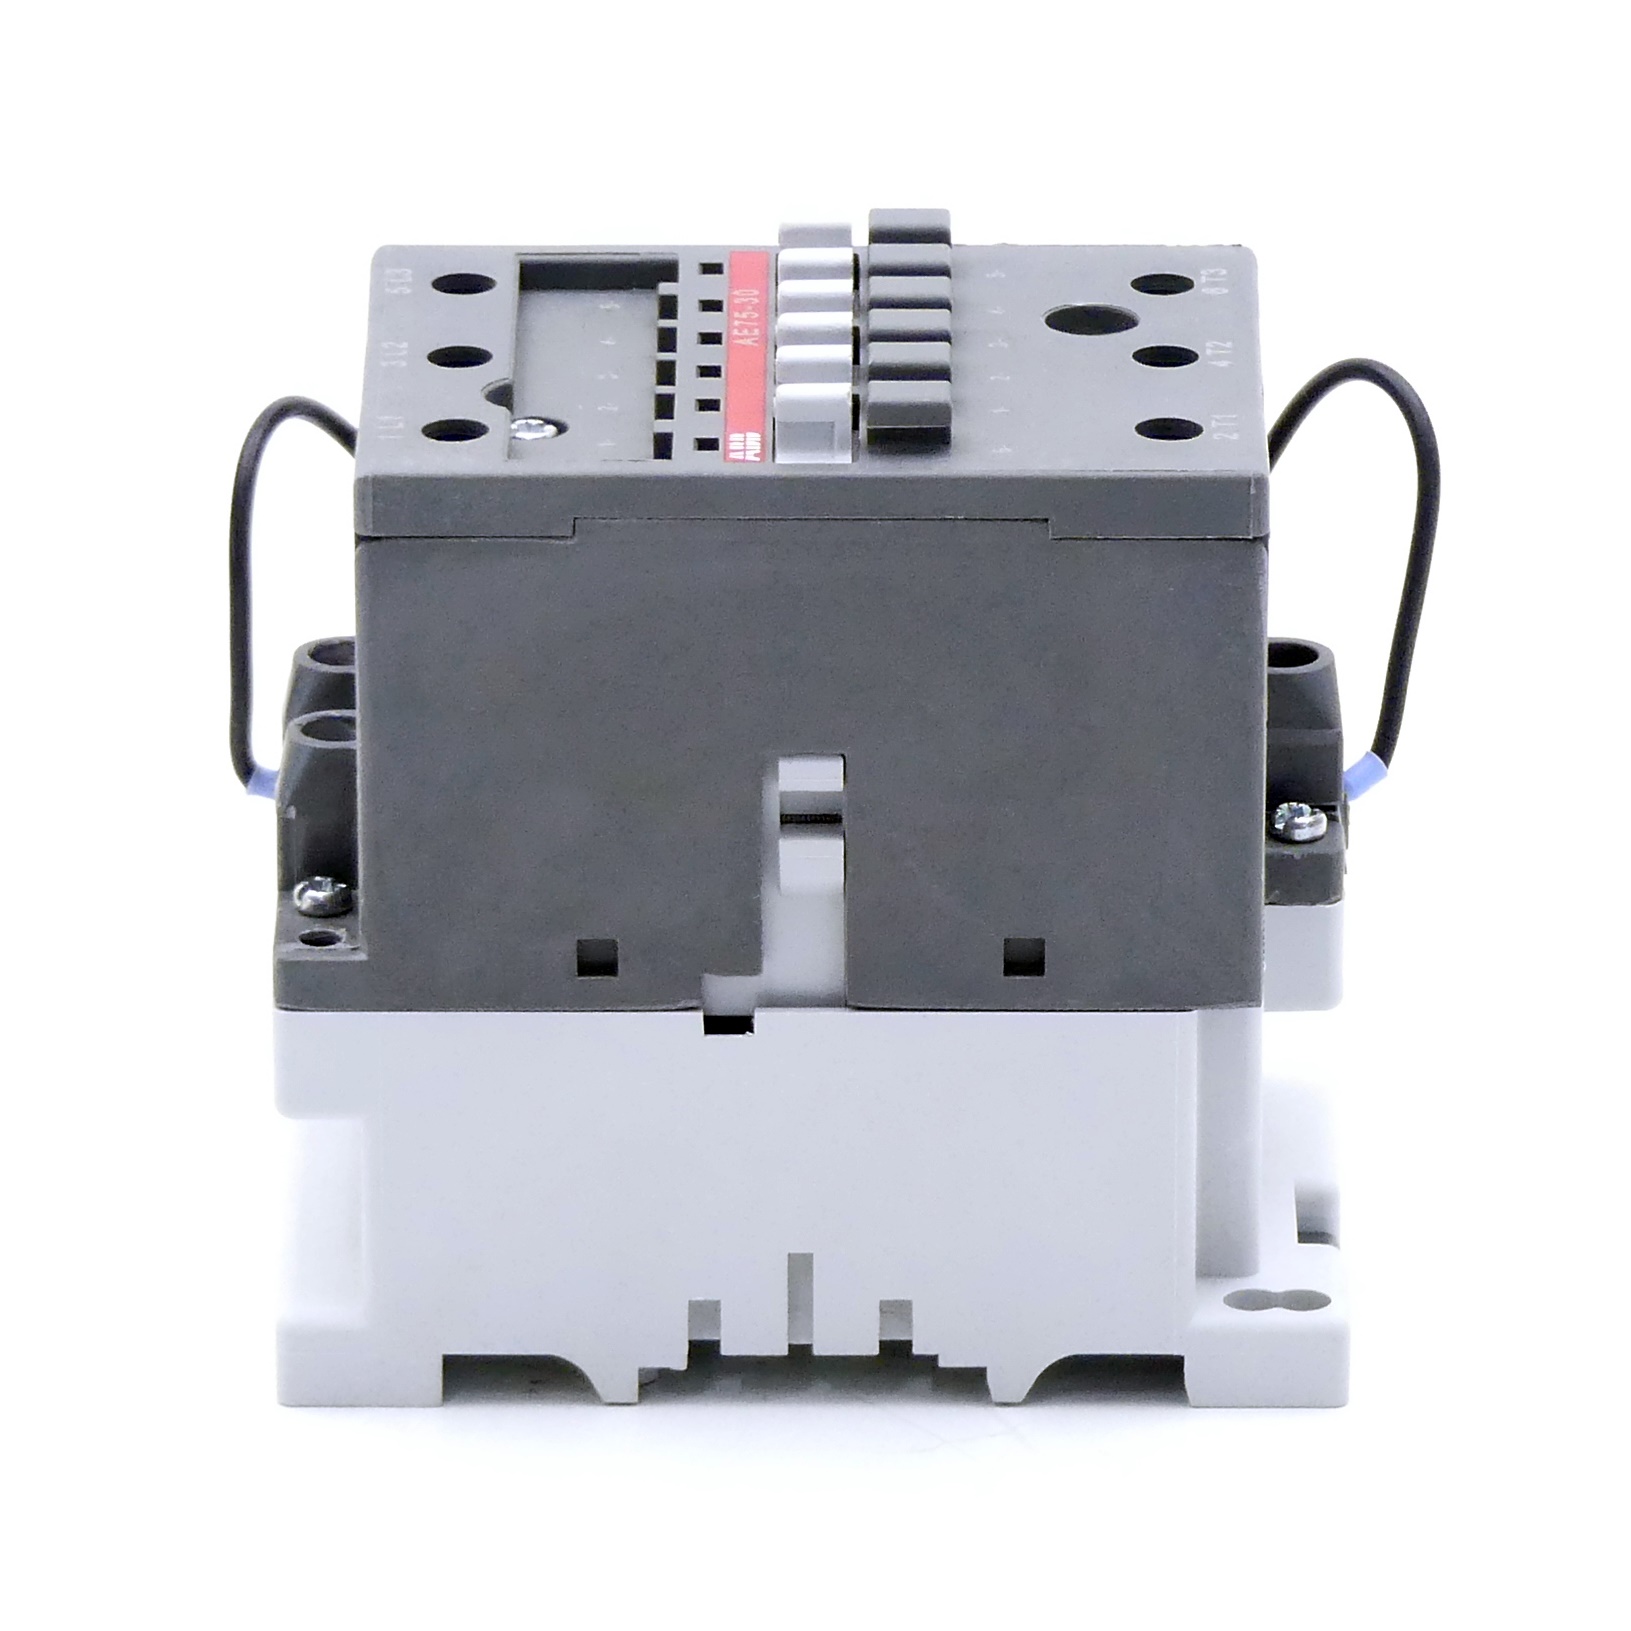 Power contactor AE75-30-11 